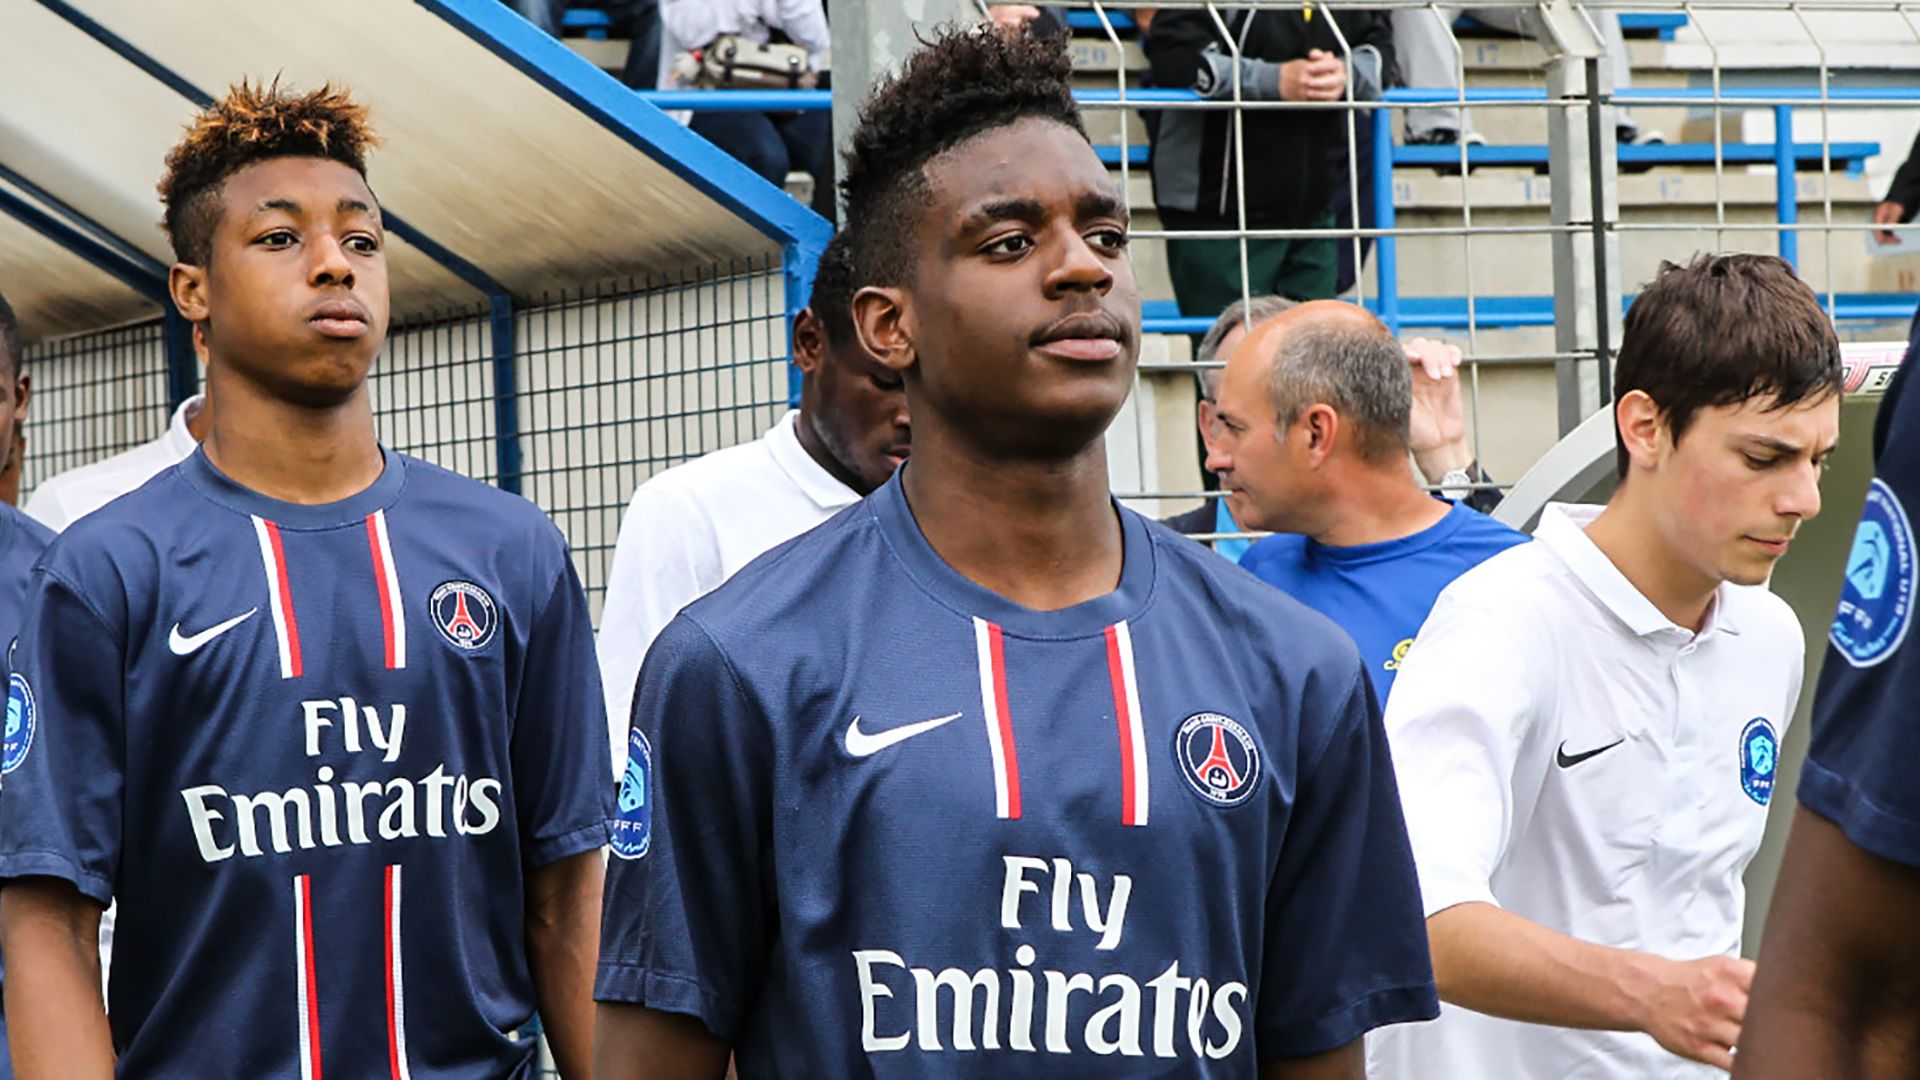 'We will never forget you' - Former PSG academy player Diakiese dies aged 24